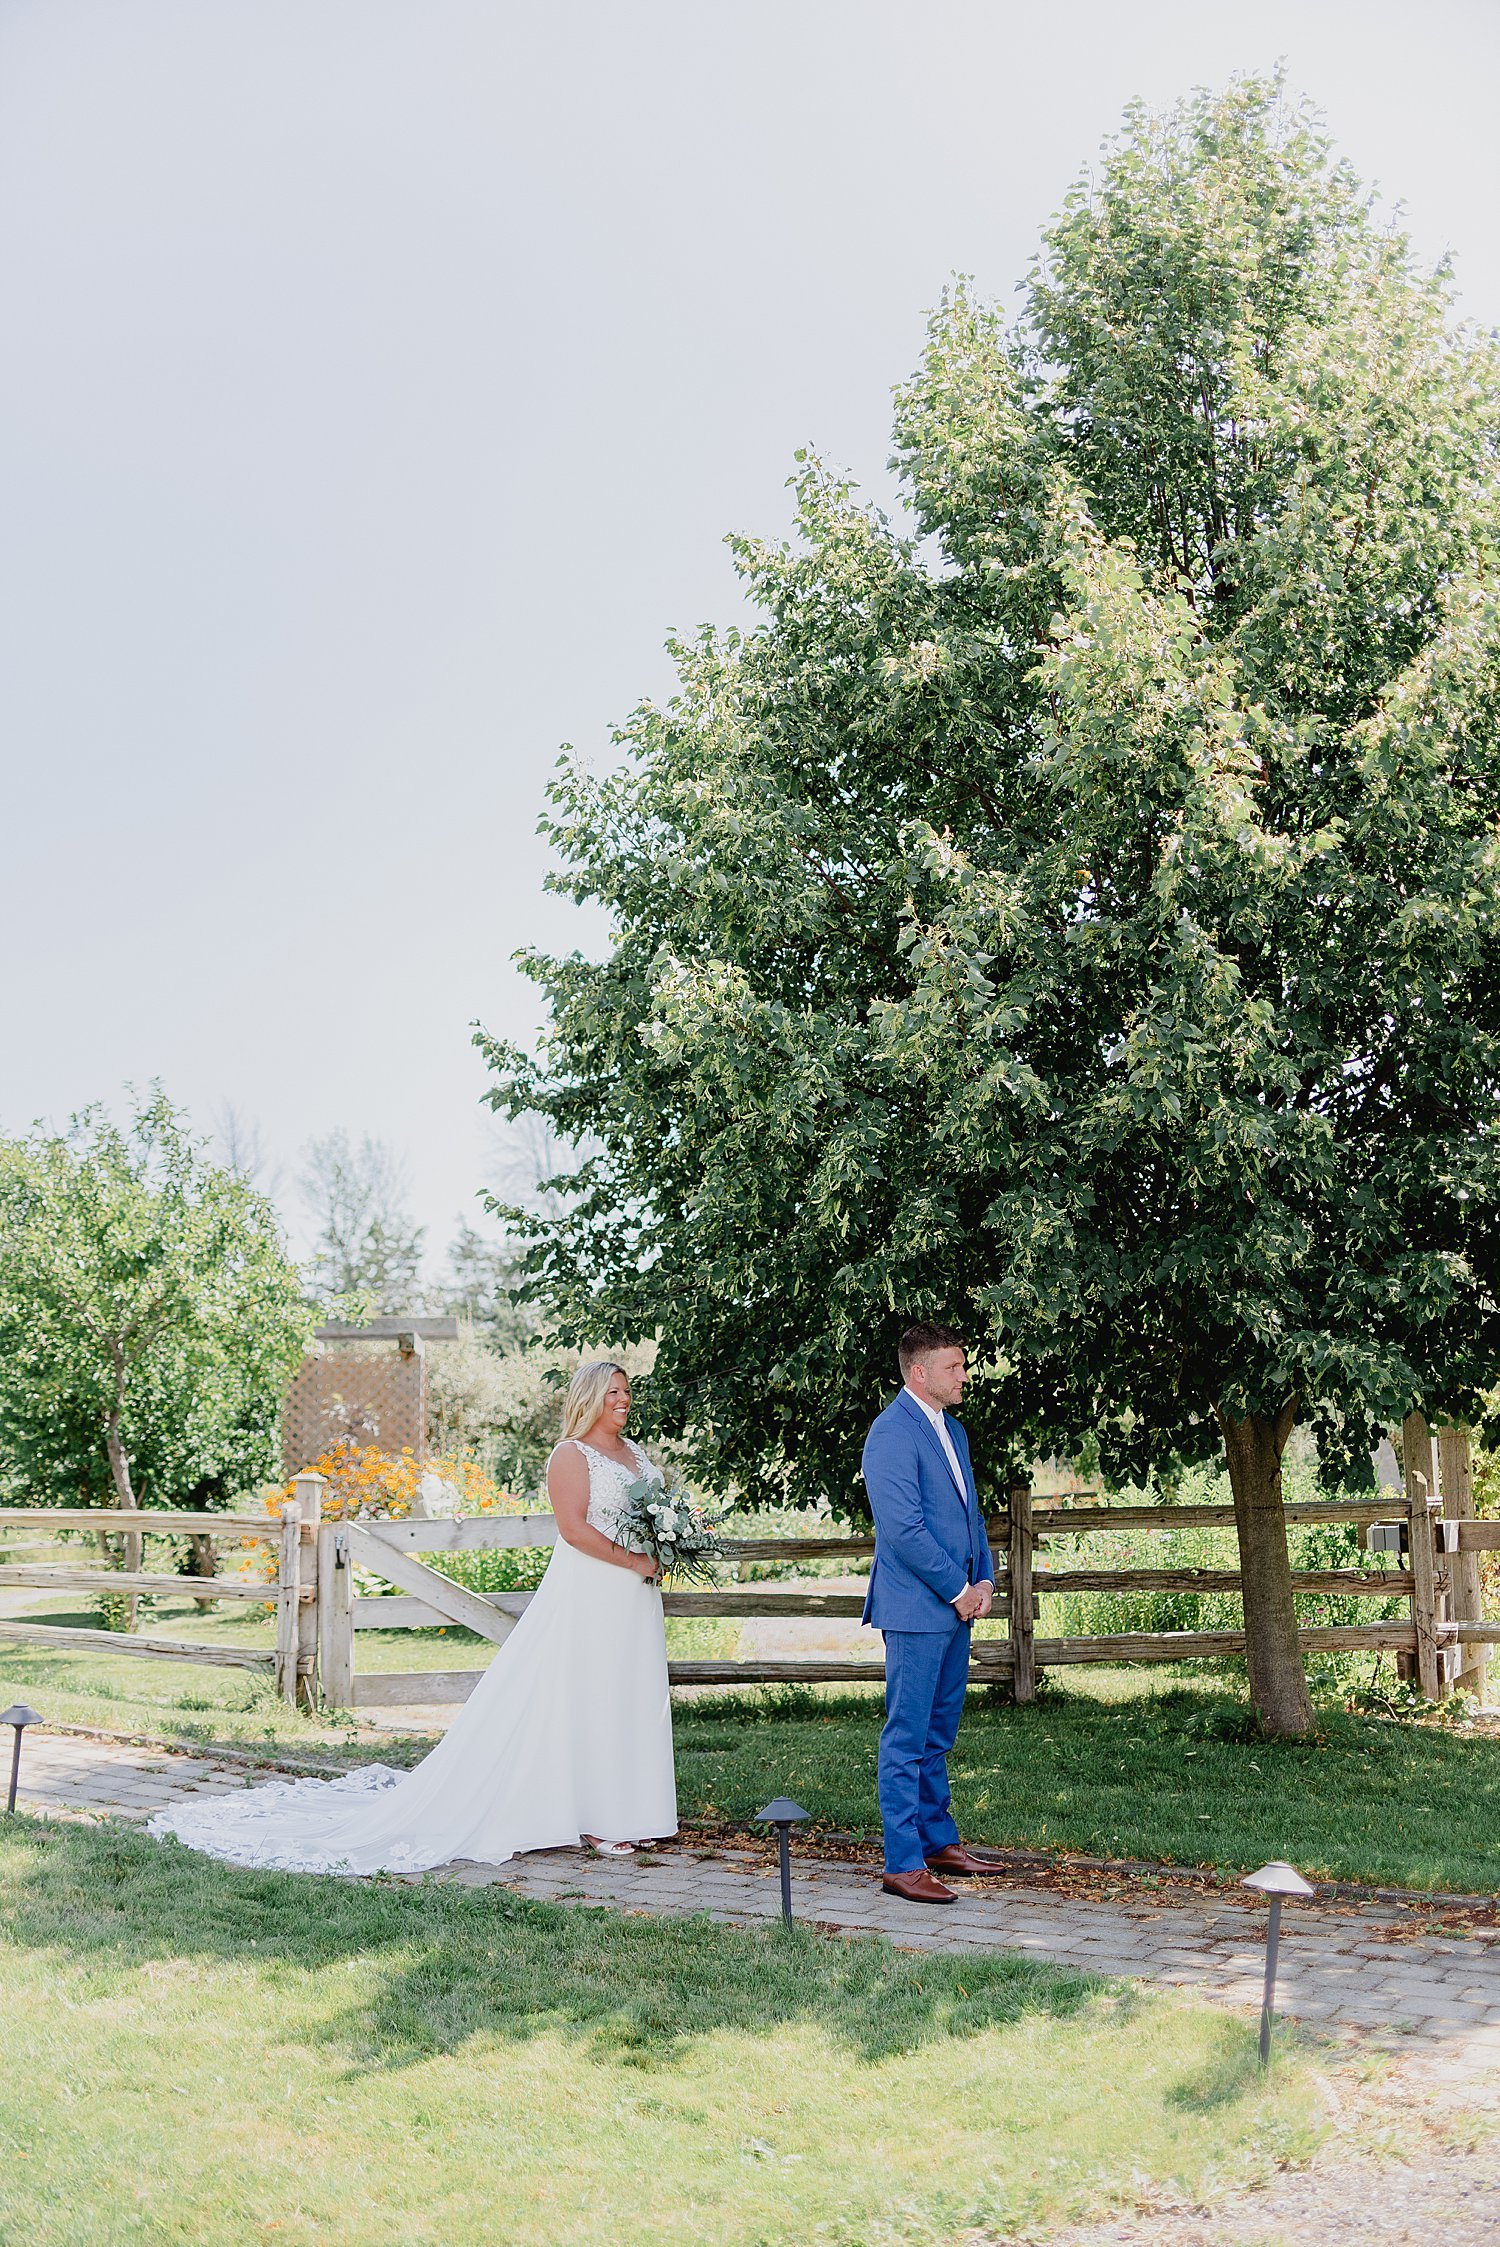 Cherryvale - Prince Edward County Wedding Venues | Holly McMurter Photographs_0004.jpg